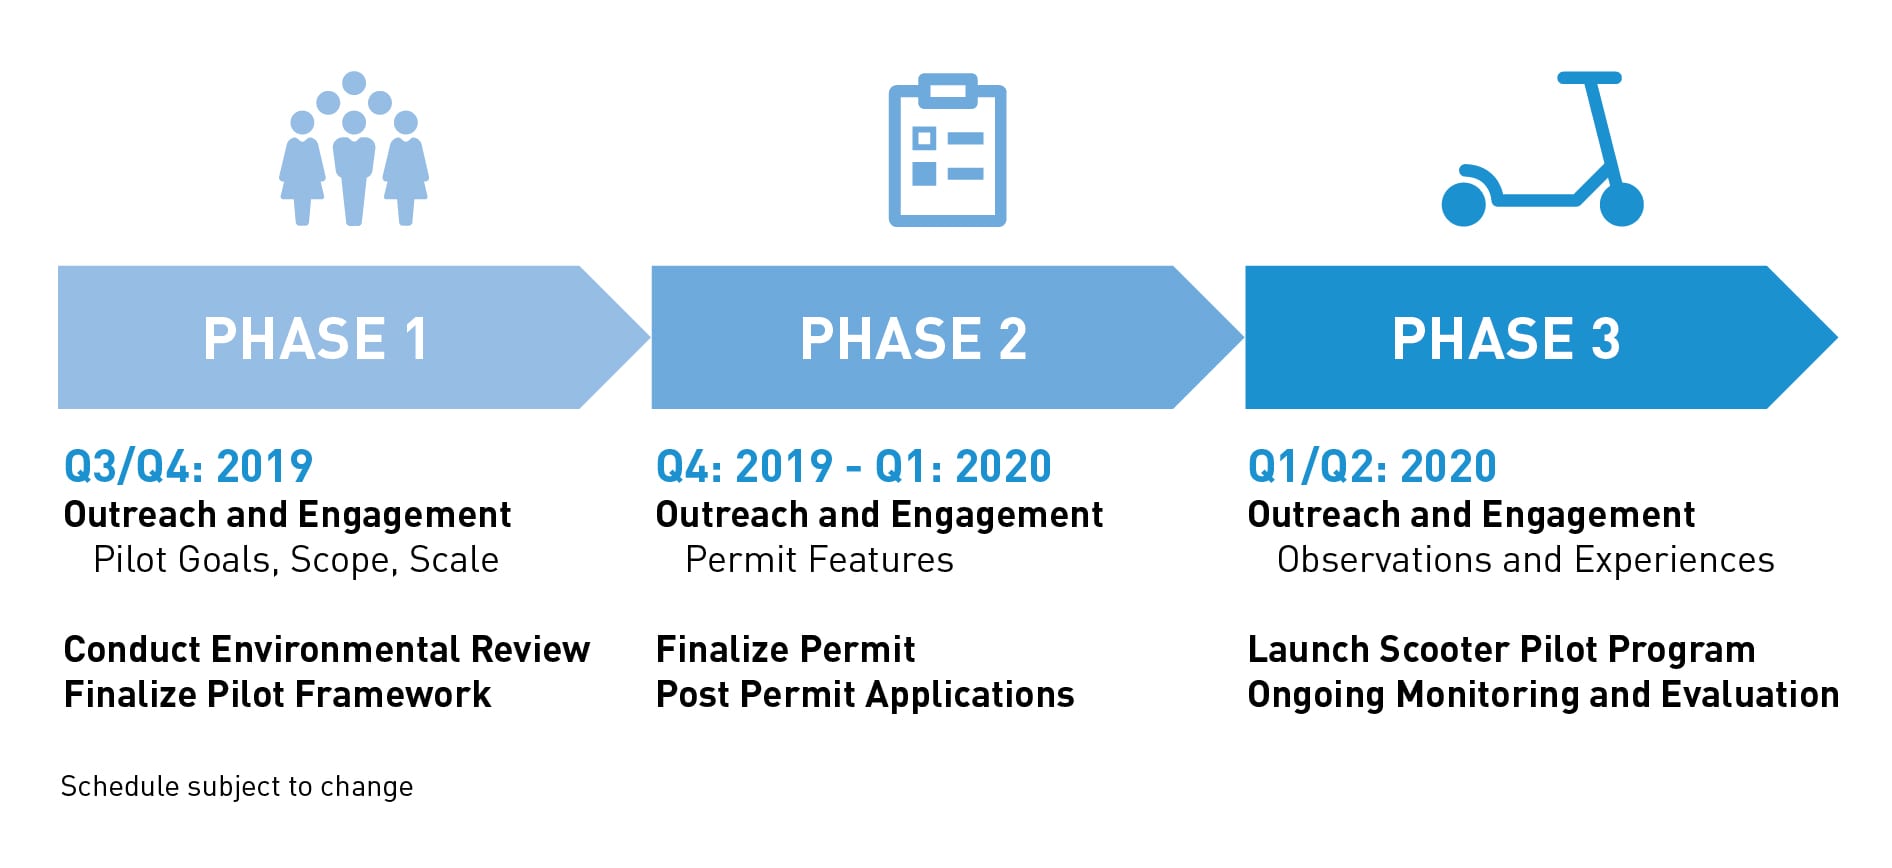 Phase 1 Q3: 2019 Outreach and Engagement Pilot Goals, Scope, Scale Conduct Environmental Review Finalize Pilot Framework PHASE 2Q4: 2019 - Q1: 2020 Outreach and Engagement Permit Features Finalize Permit Post Permit Applications PHASE 3Q1/Q2: 2020Outreach and Engagement Observations and Experiences Launch Scooter Pilot Program Ongoing Monitoring and Evaluation